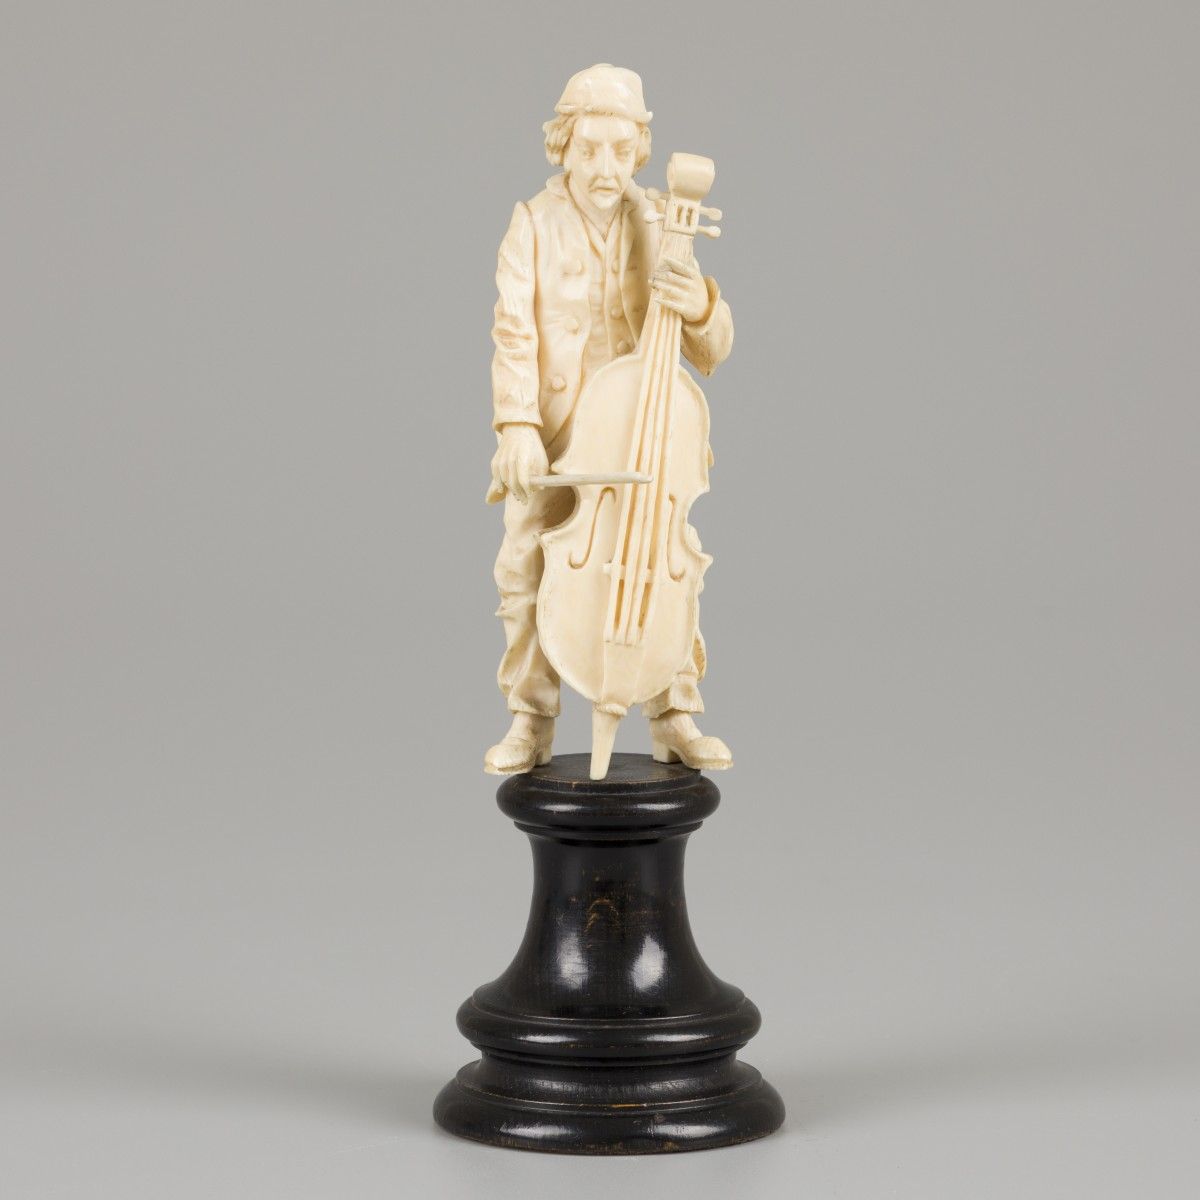 An ivory sculpture of a man with bass, 19th century. Dim. 20 x 5 cm. Estimation &hellip;